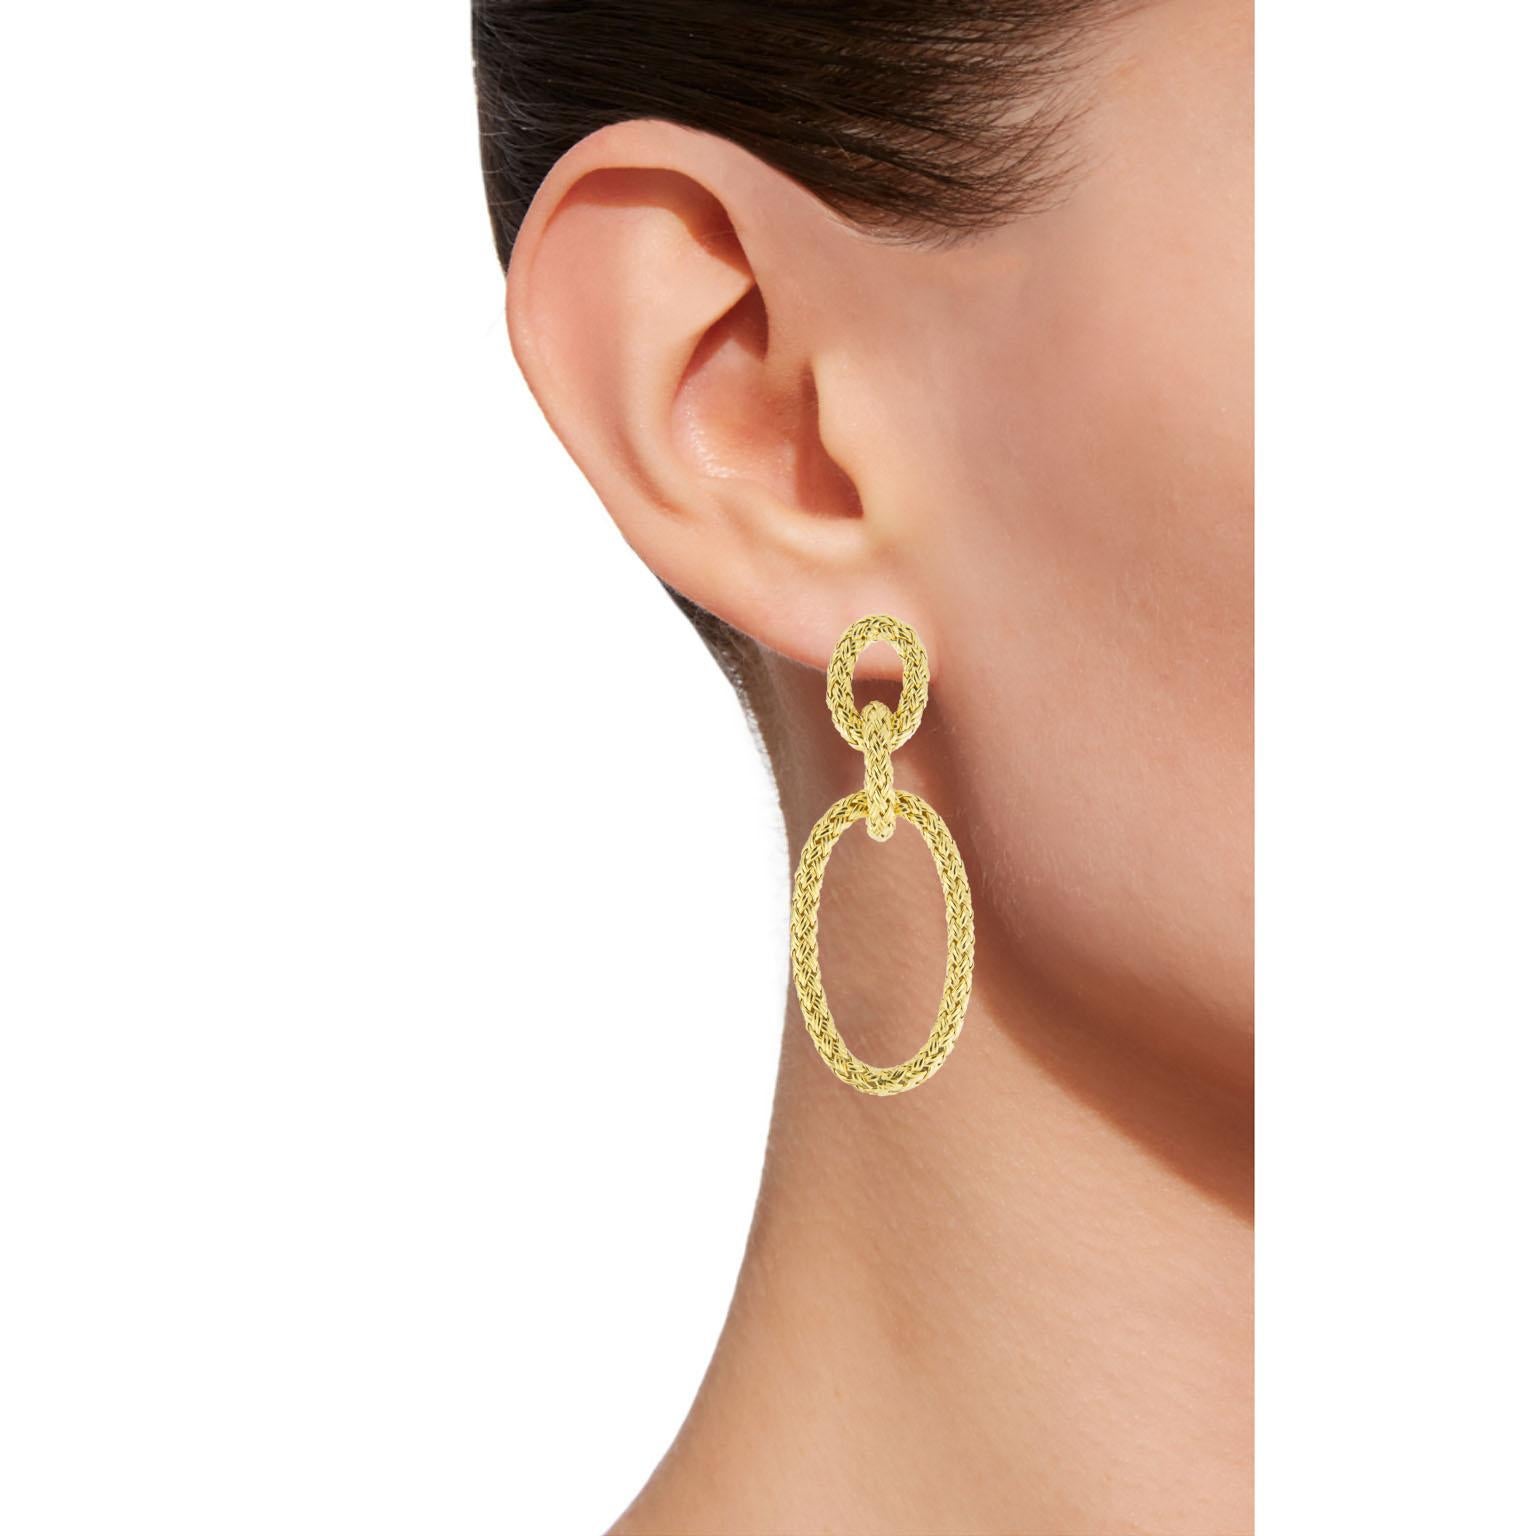 Jona design collection, hand crafted in Italy, gold-plated sterling silver basket weave ear pendants. 
Dimensions: H 2.04 in / 5.20 cm X W 0.78 in / 19.86 mm X D 0.11 in / 2.98 mm
Weight: 8.7 g
All Jona jewelry is new and has never been previously